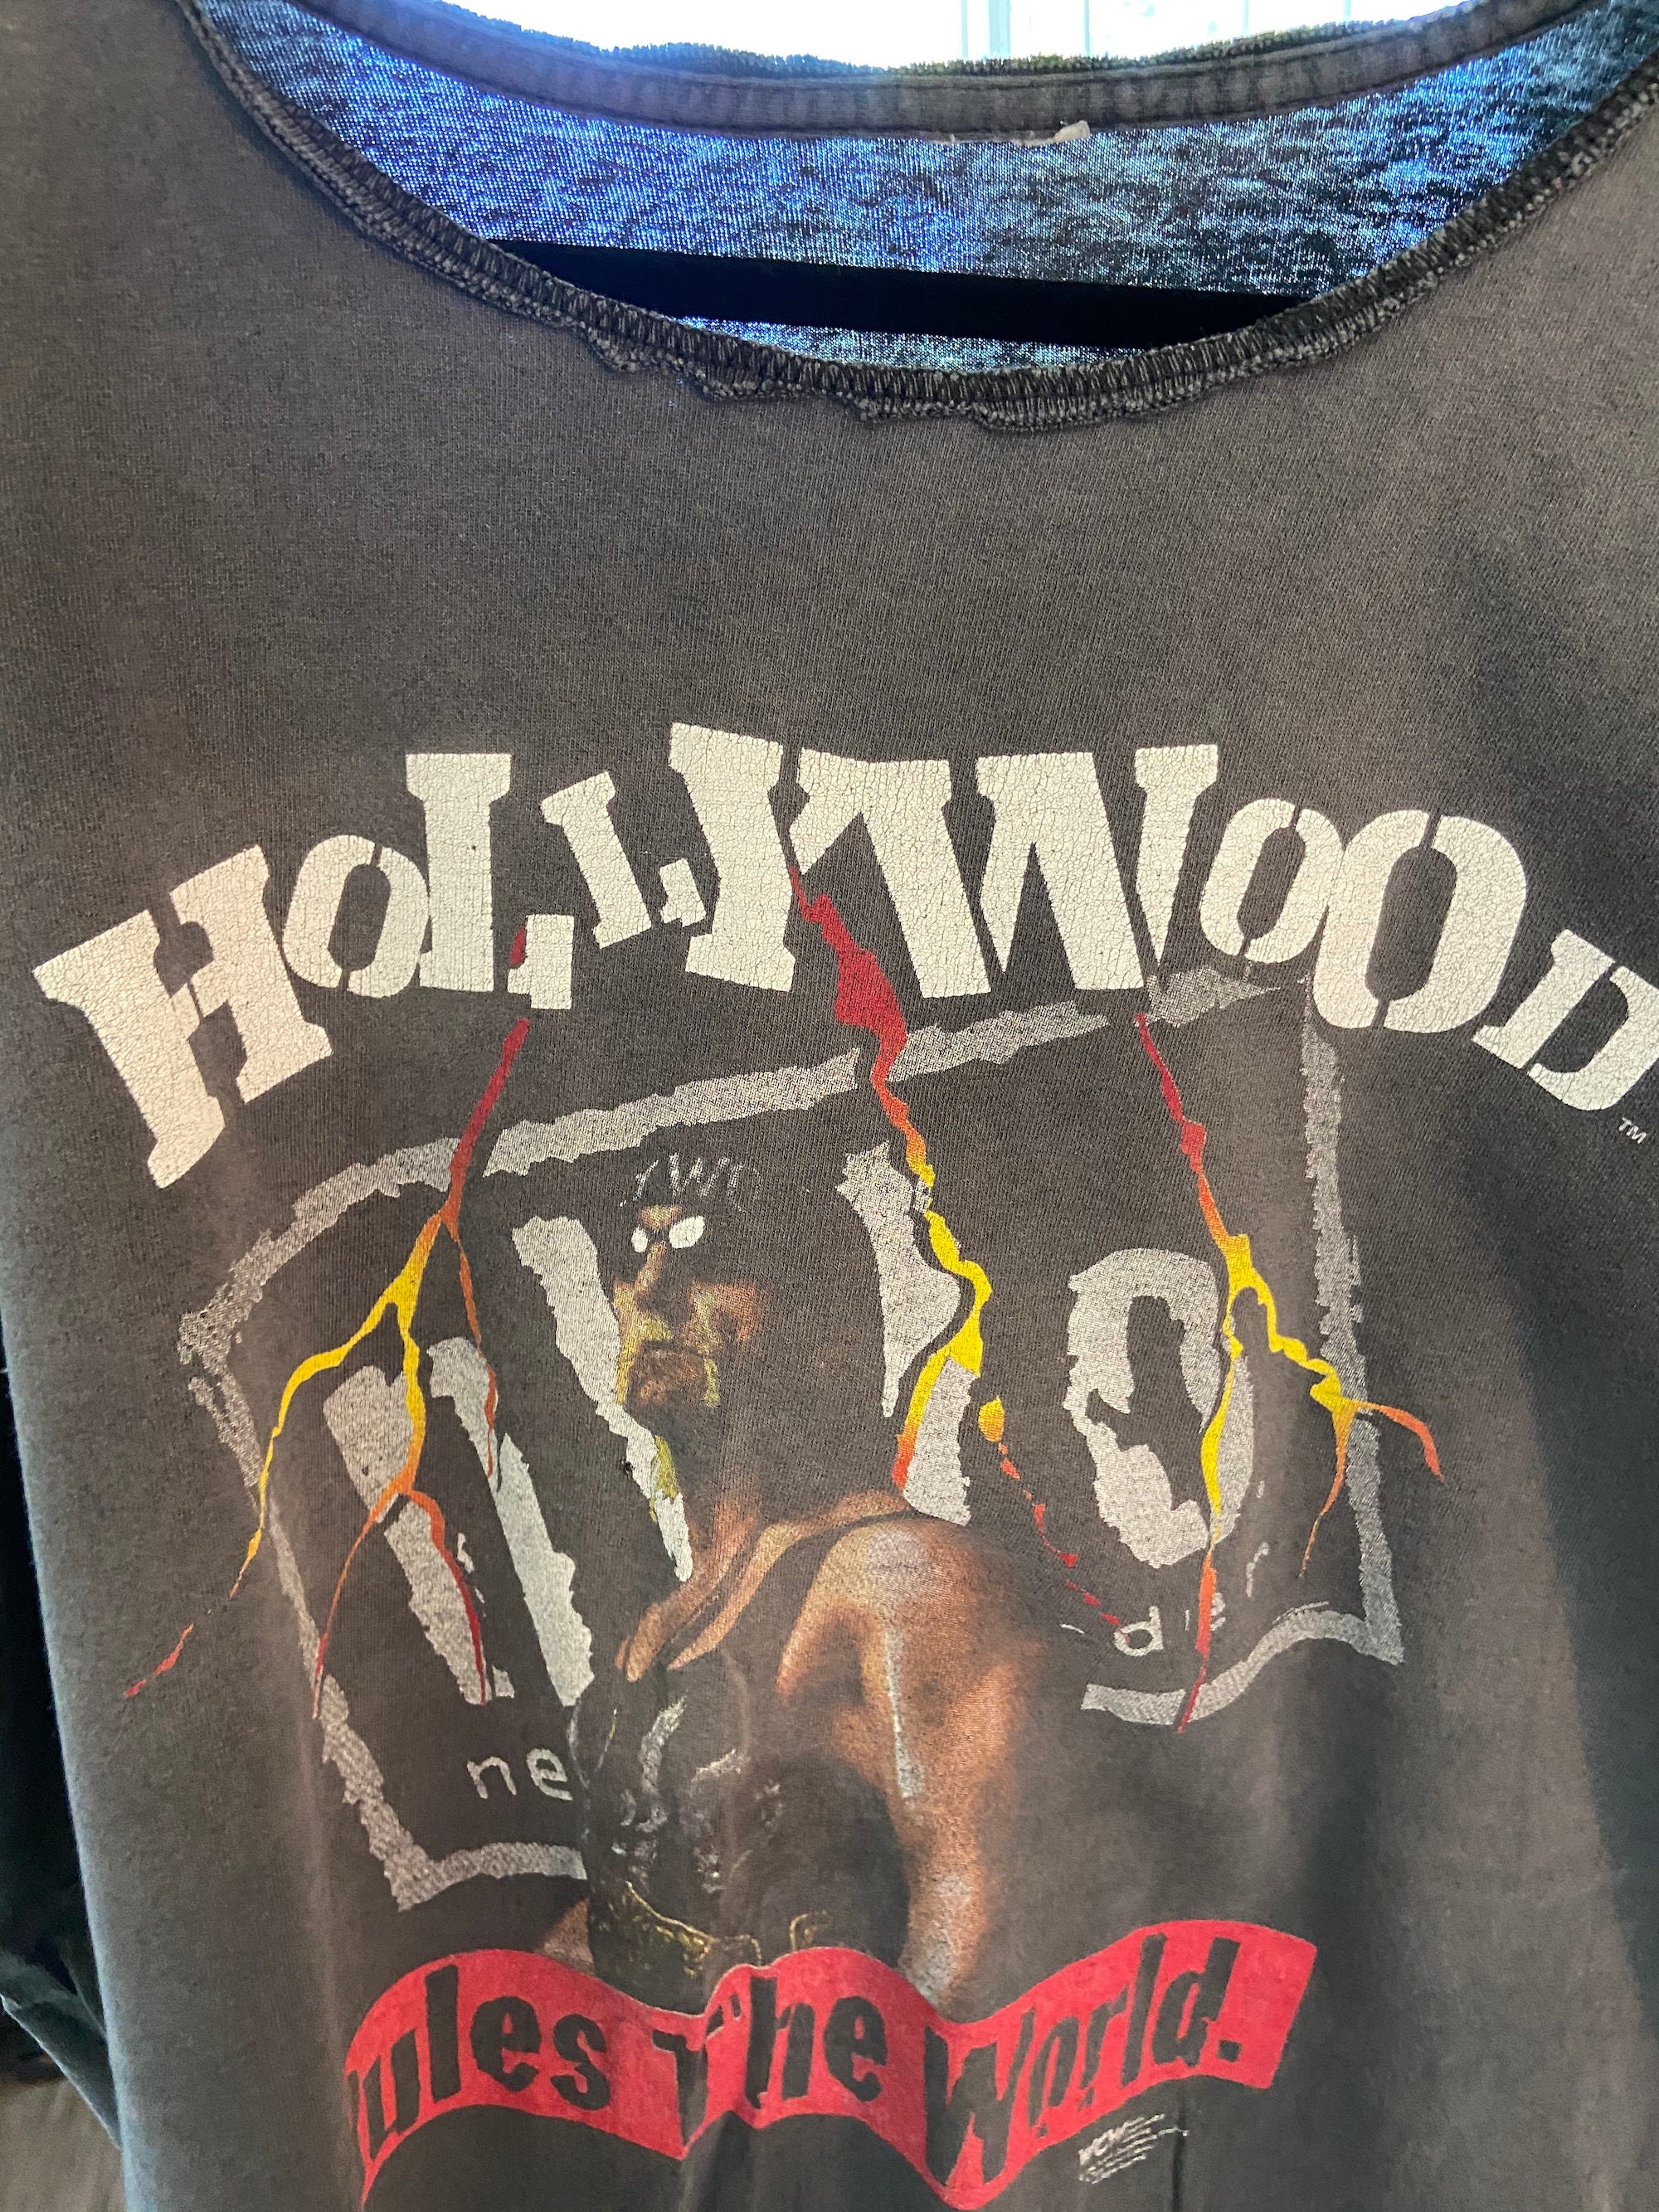 Skull And Bones T-Shirt from Hellwood – Hellwood Outfitters